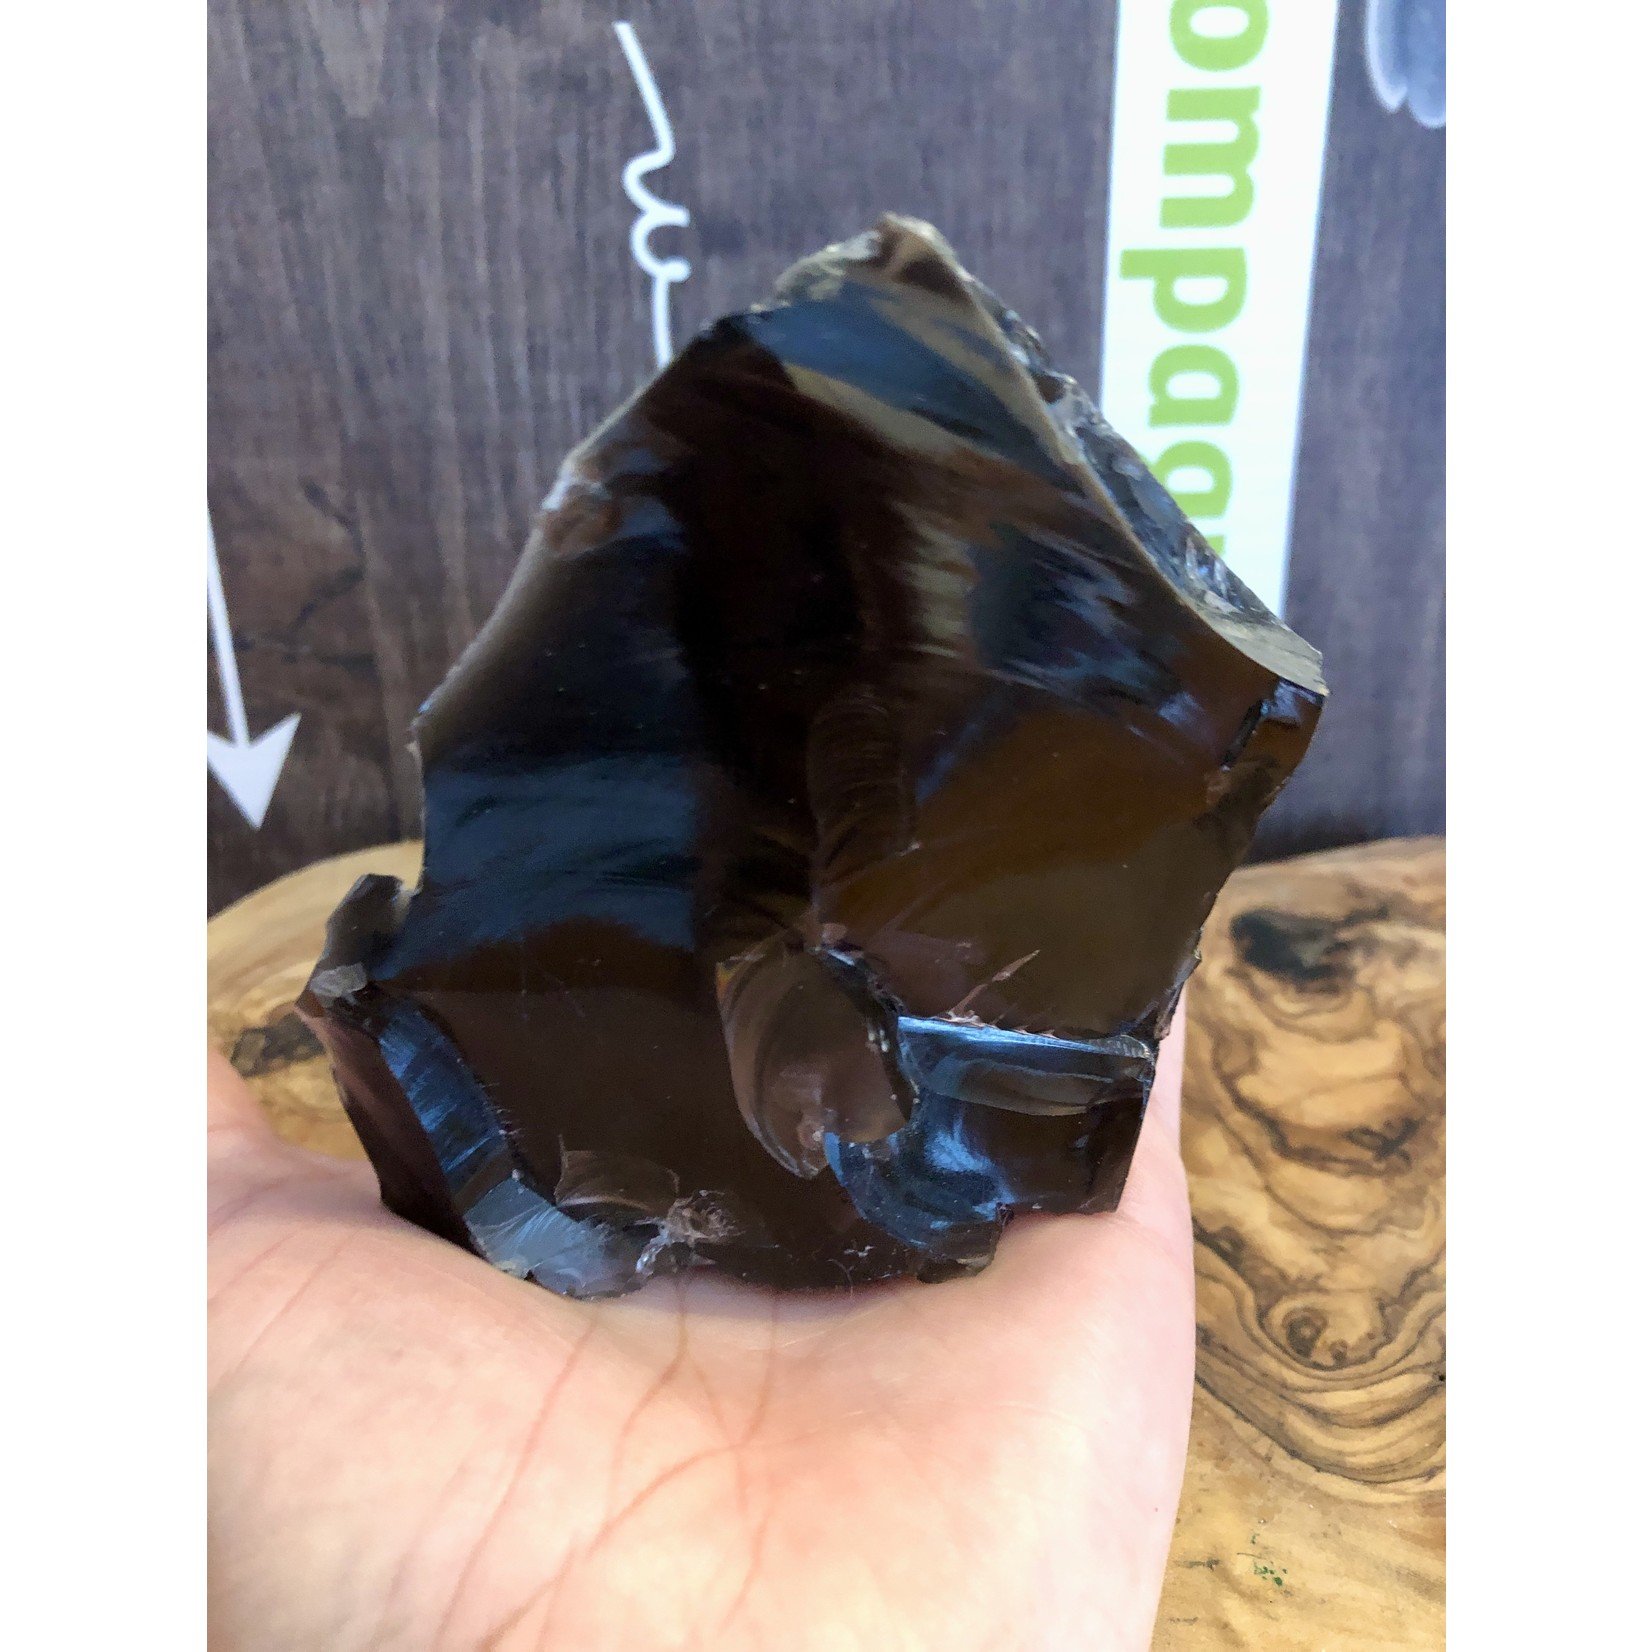 beautiful rainbow obsidian polished, brings hope enlightenment and energy to the most blocked and stagnant areas of the emotional body